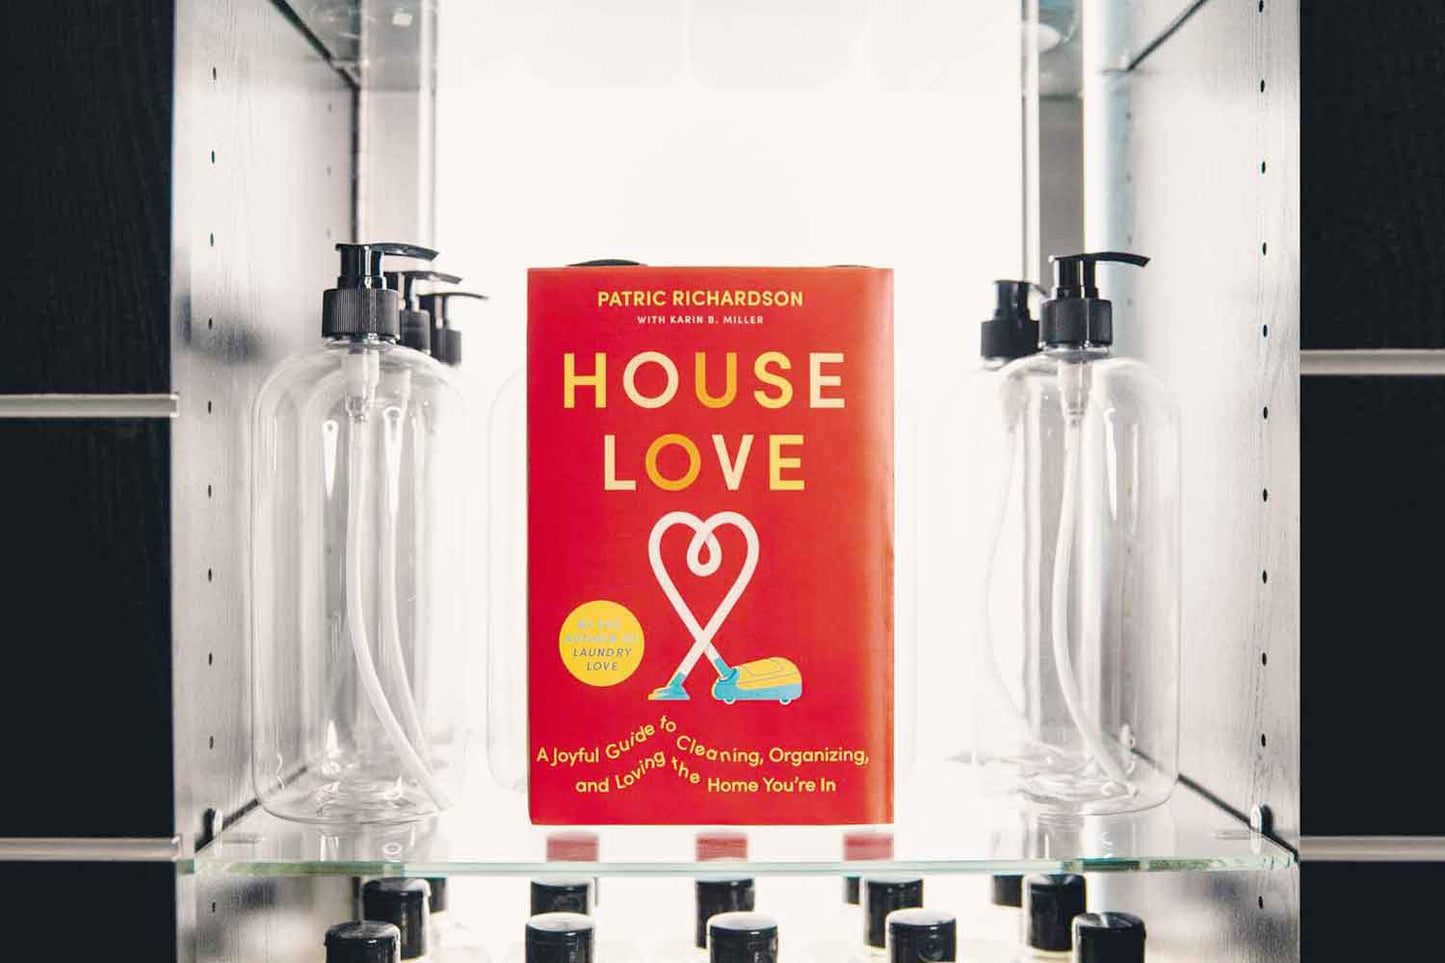 "House Love" Book Hardcover – Signed & Inscribed by Patric